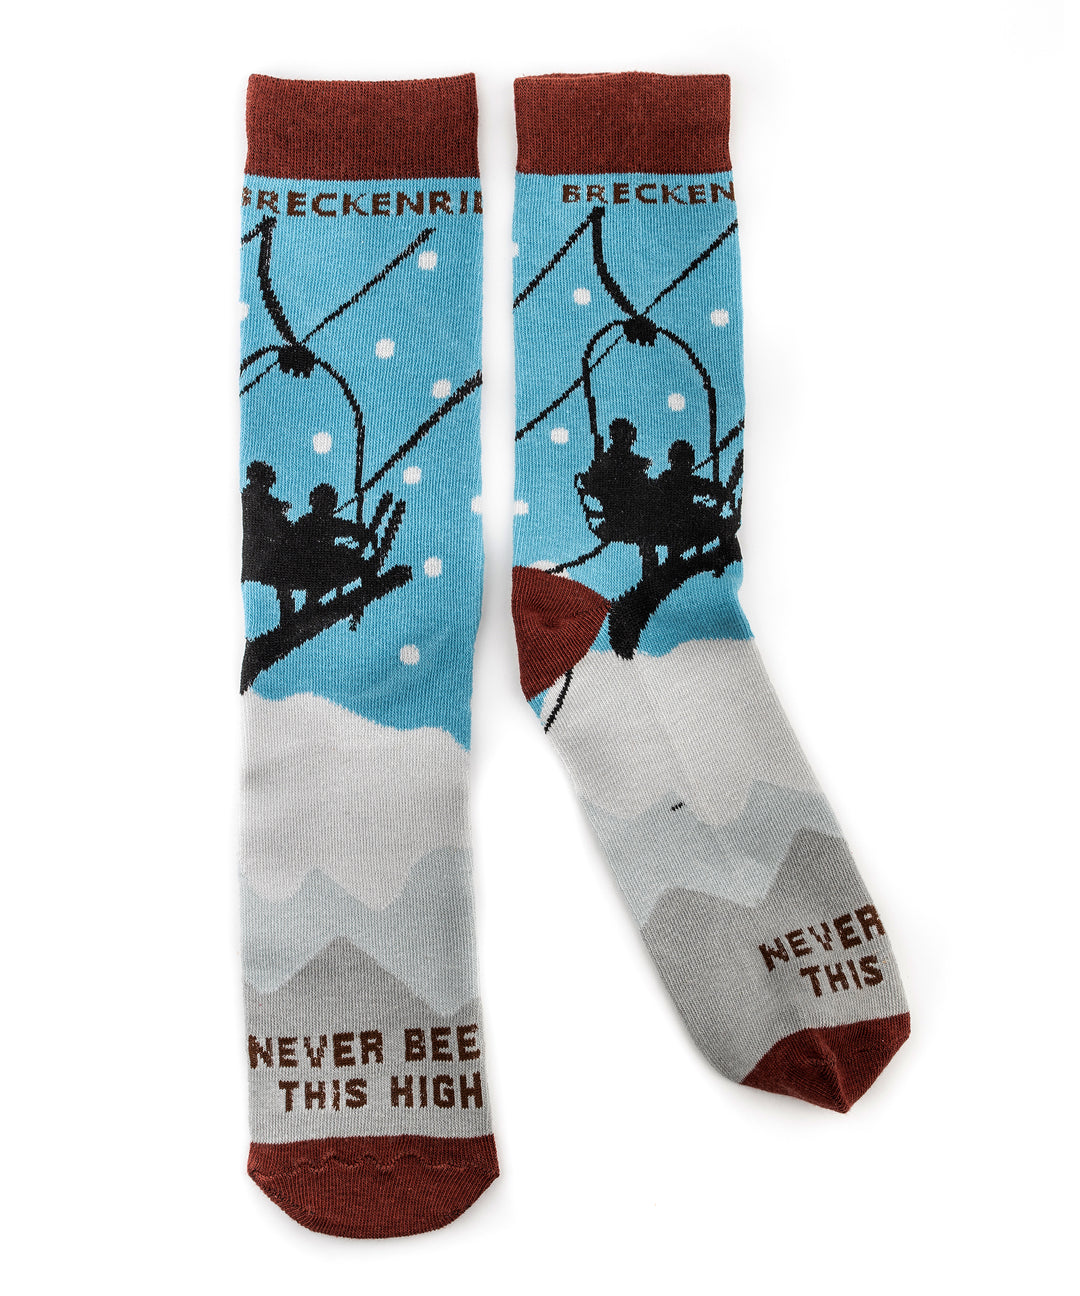 Never Been This High Winter Socks